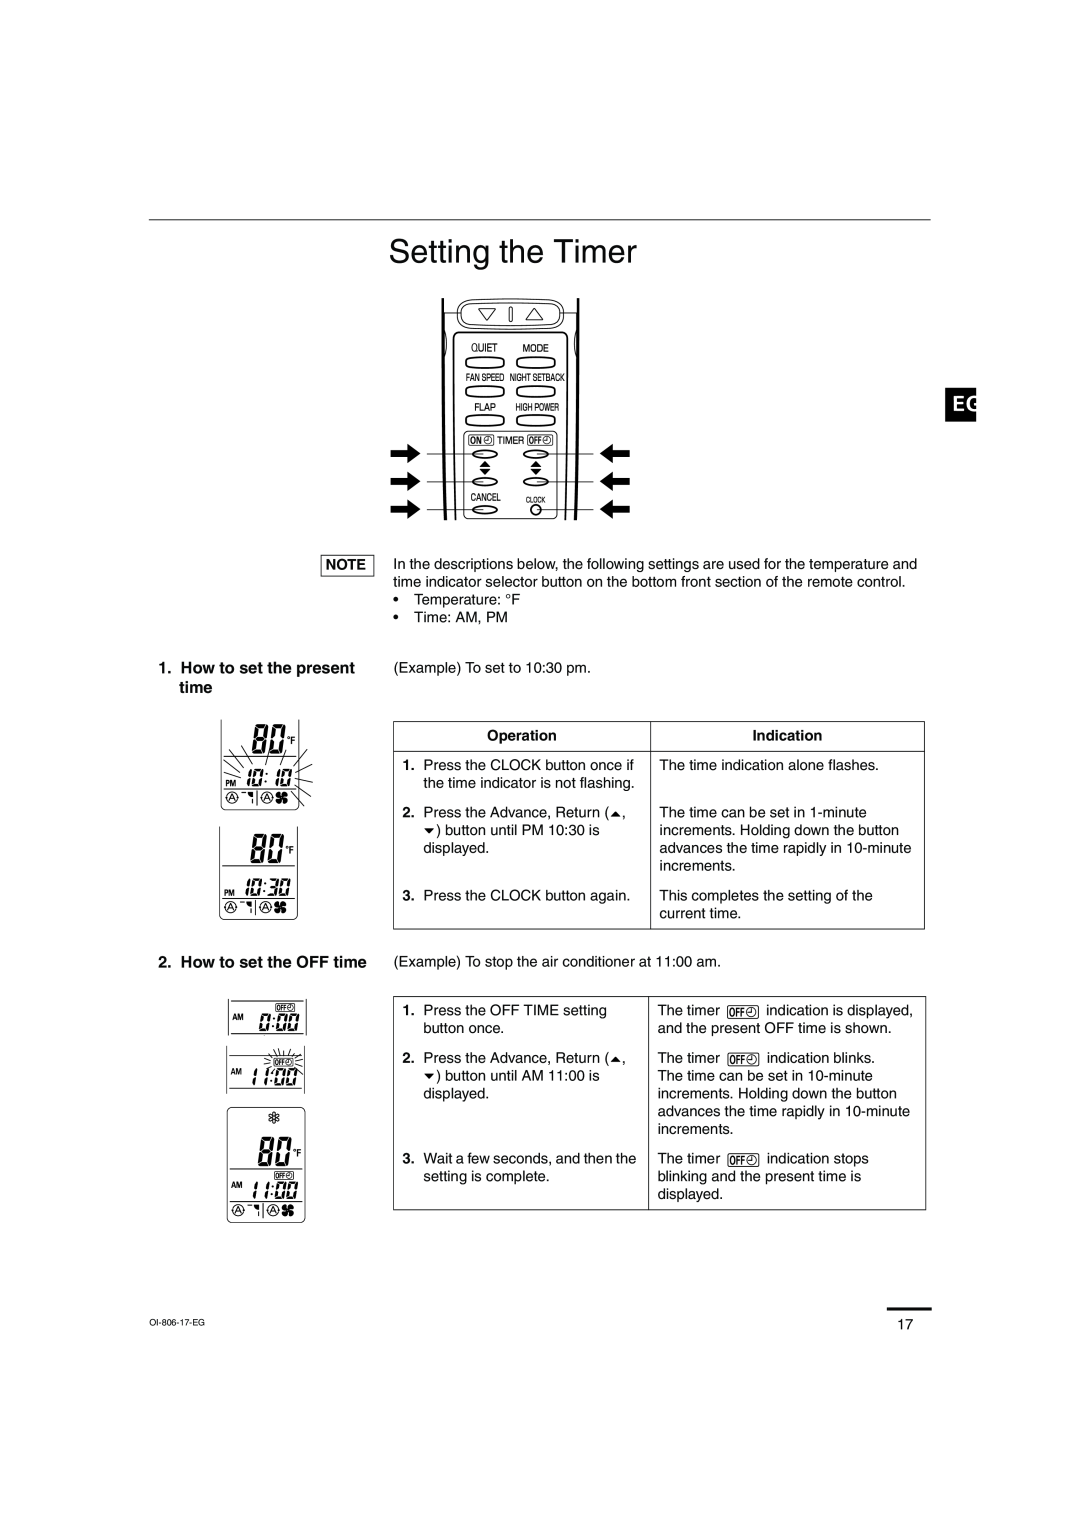 Sanyo KMS1272, KMS0972 instruction manual Setting the Timer, How to set the present time 